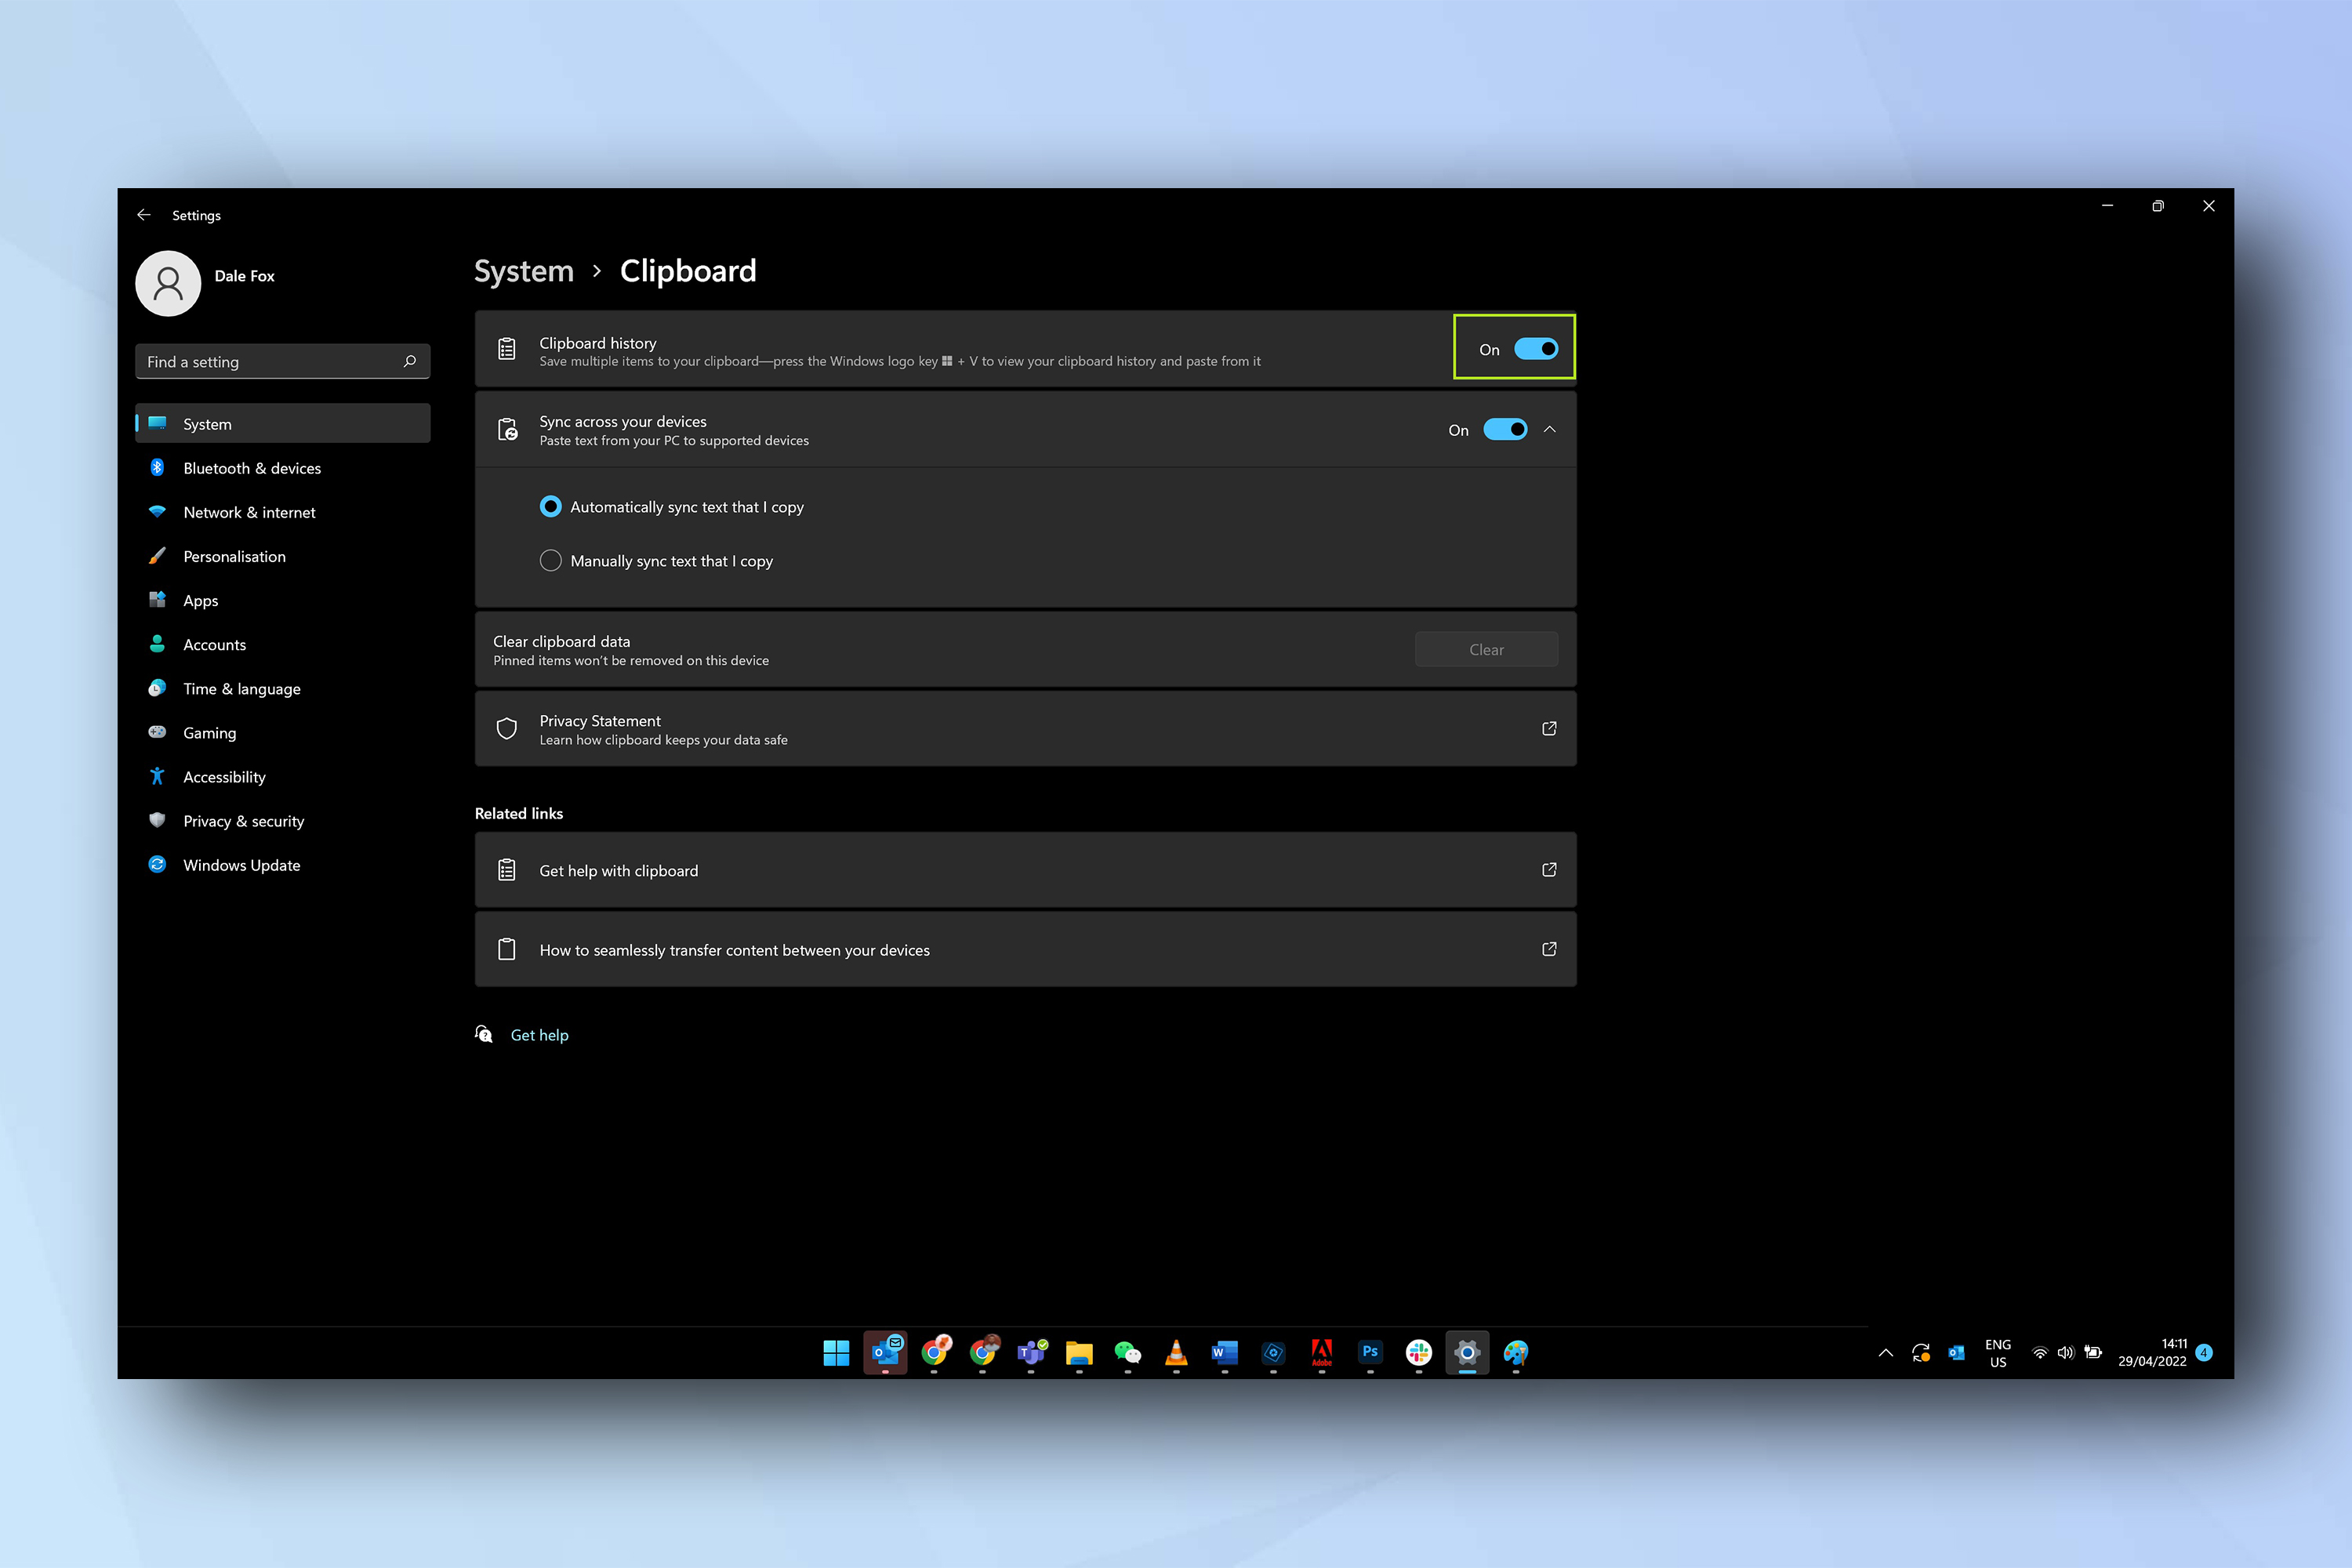 Windows 11 Clipboard Settings menu showing how to enable clipboard history in Windows